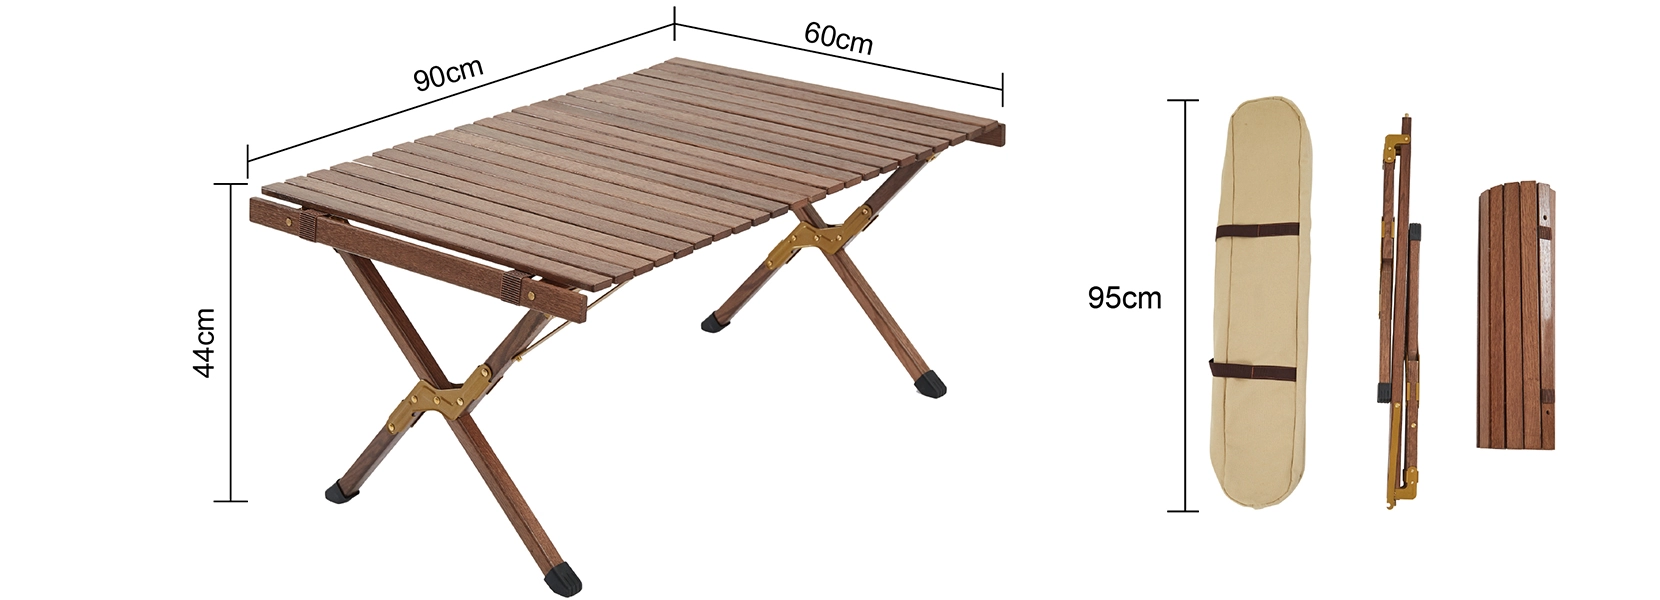 details of Nature Beech Wood Roll up Folding Table for Outdoor Picnic